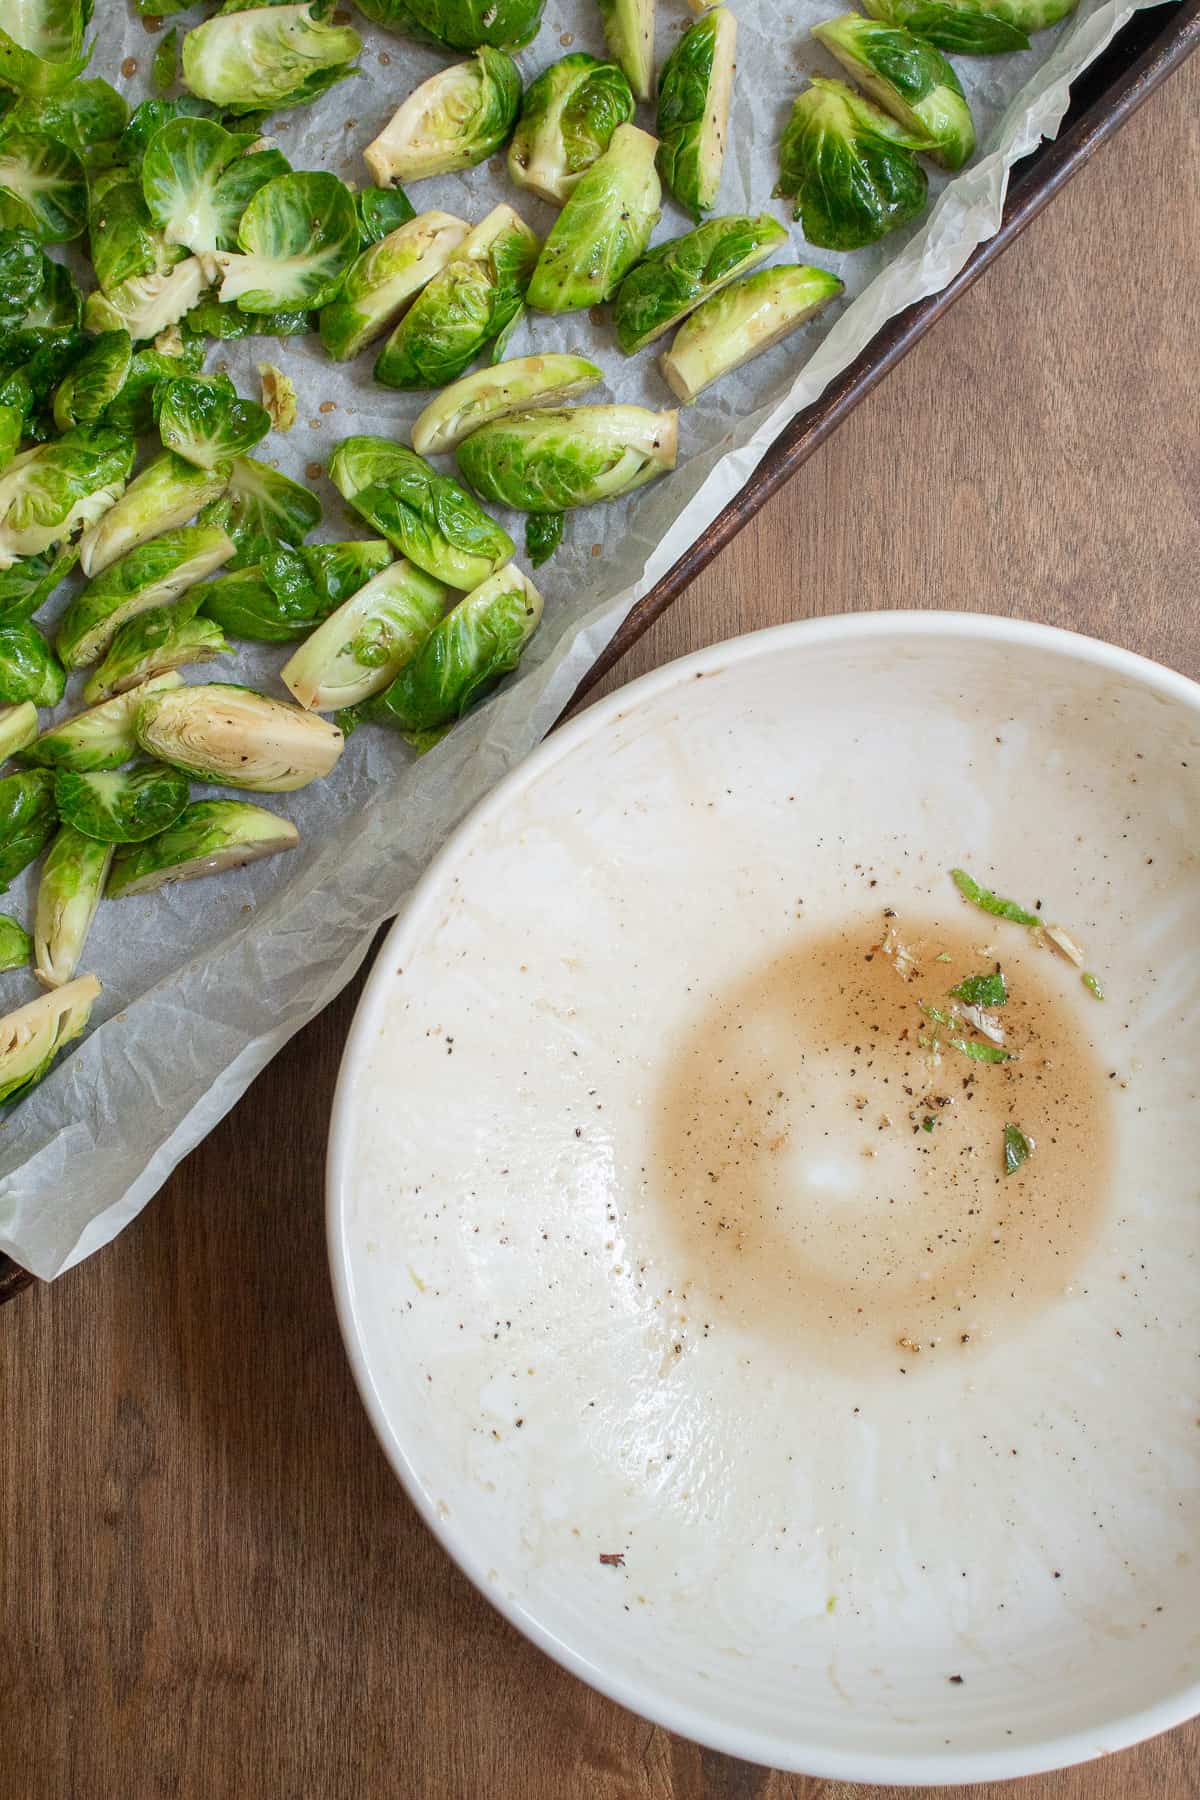 The bowl used for tossing the sprouts with the glaze has some remaining glaze in it. It sits next to the sheet pan loaded with the brussel sprouts.